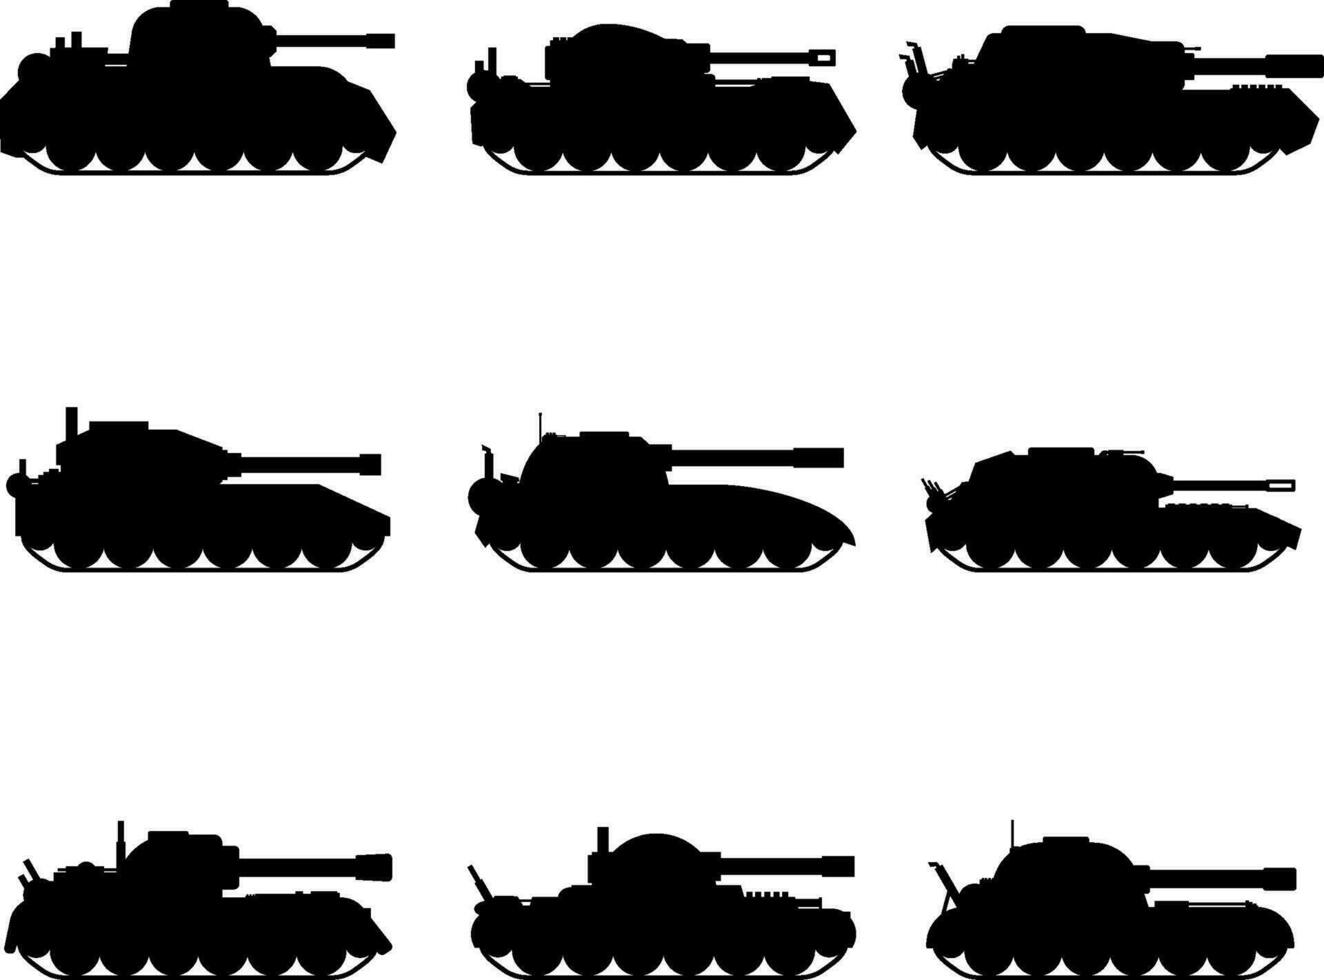 Tank icon set. Military vehicle graphic resources for icon, symbol, or sign. Vector icon of military tank for design of military, war or conflict